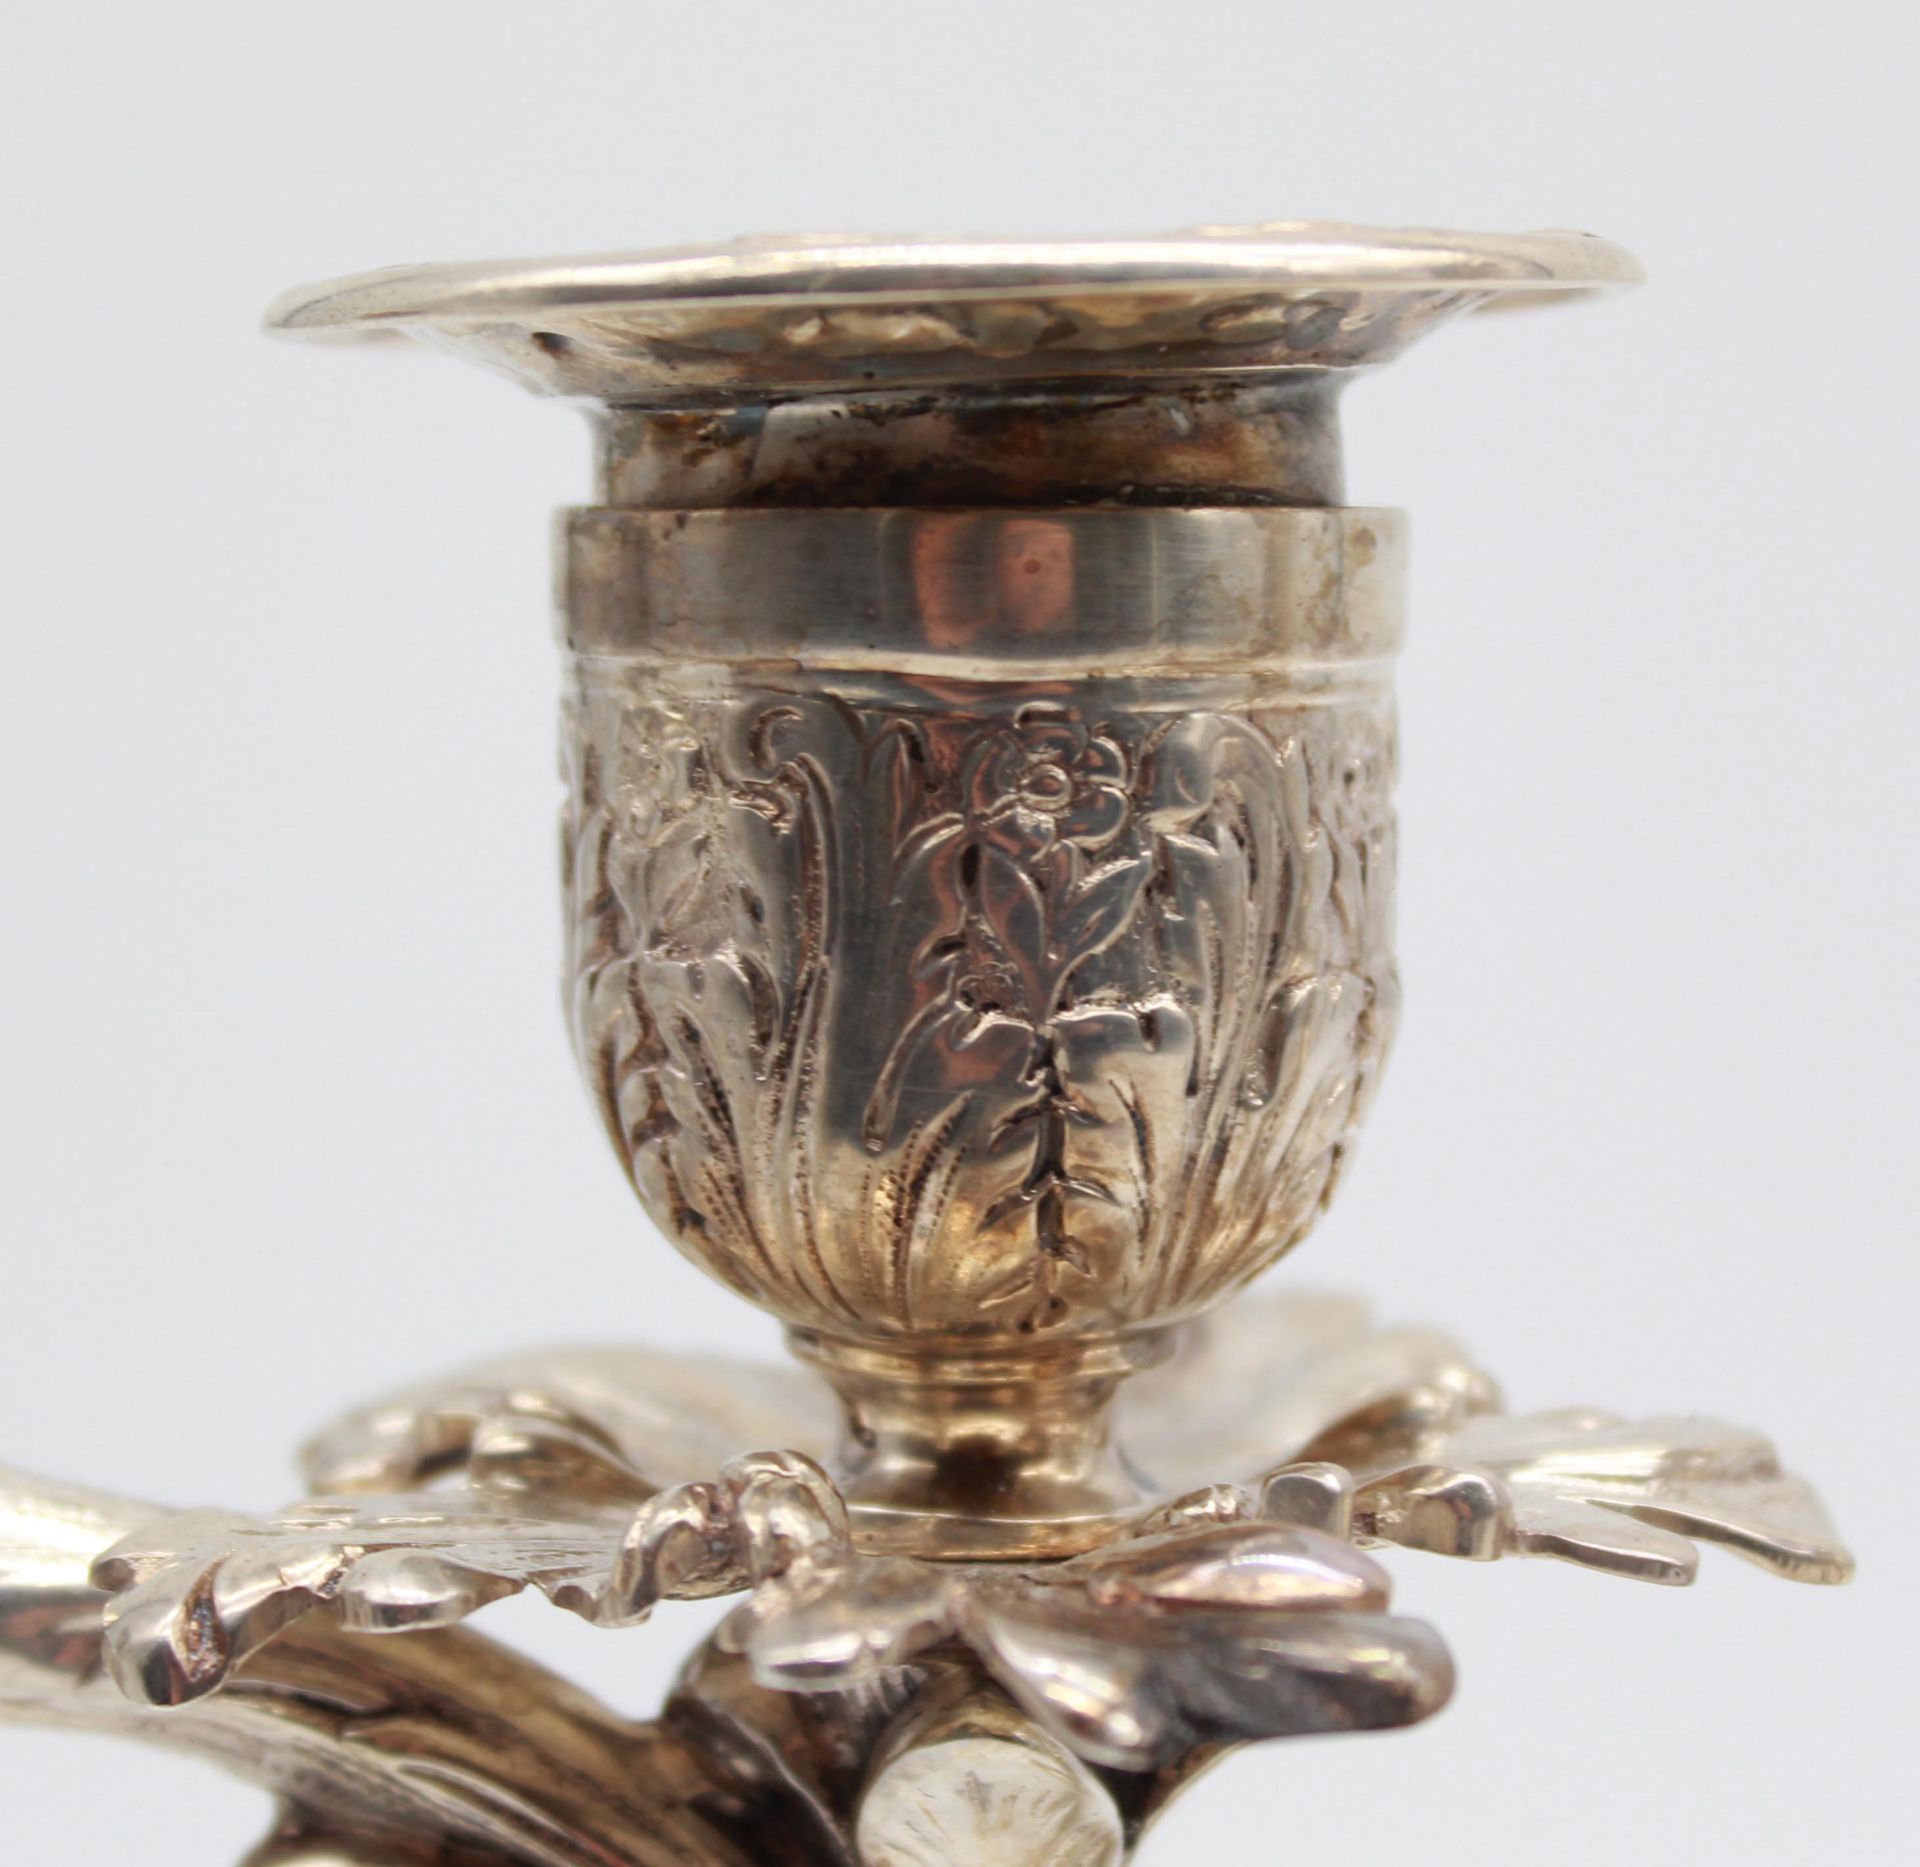 Candlestick, silver 800. 5 flames. Hallmarks. - Image 4 of 15